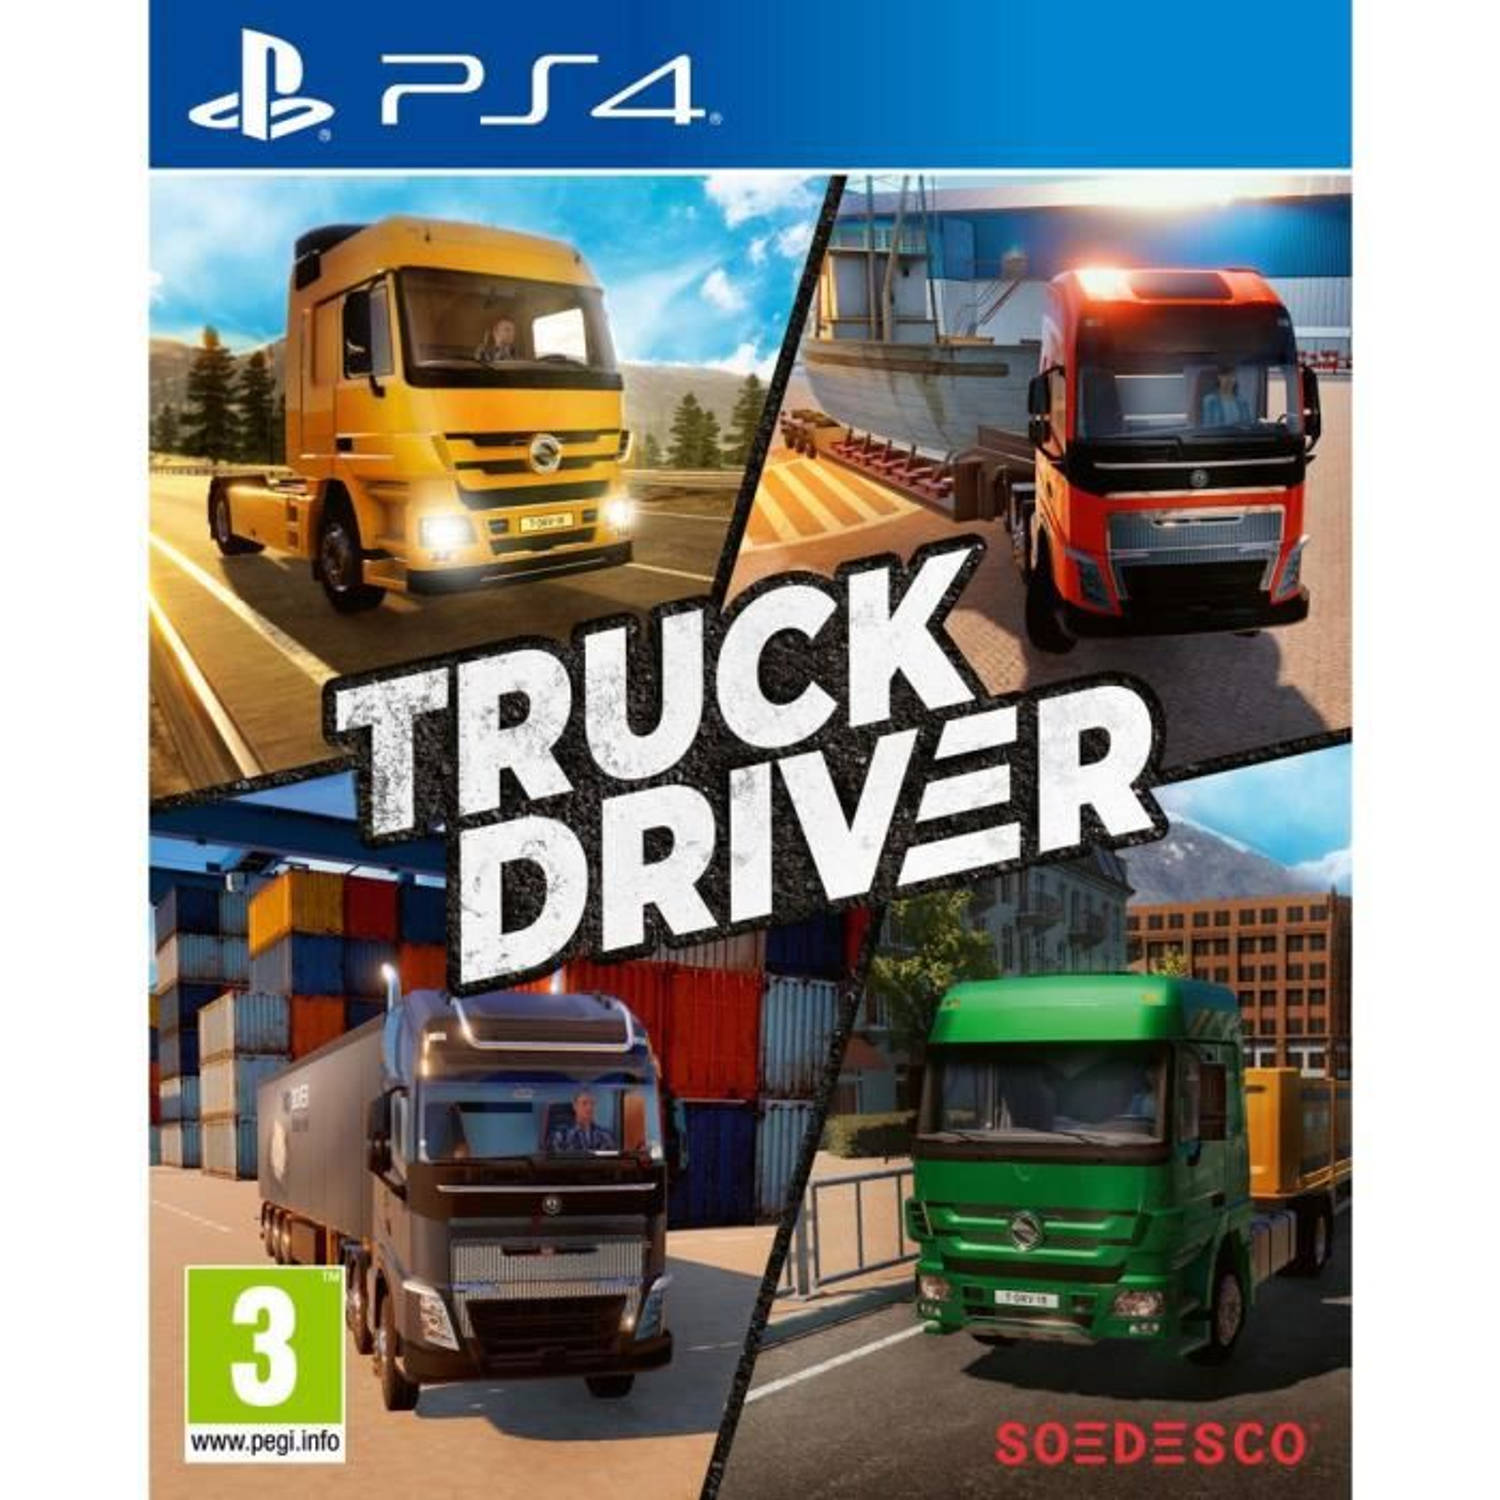 Truck Driver PS4 Game